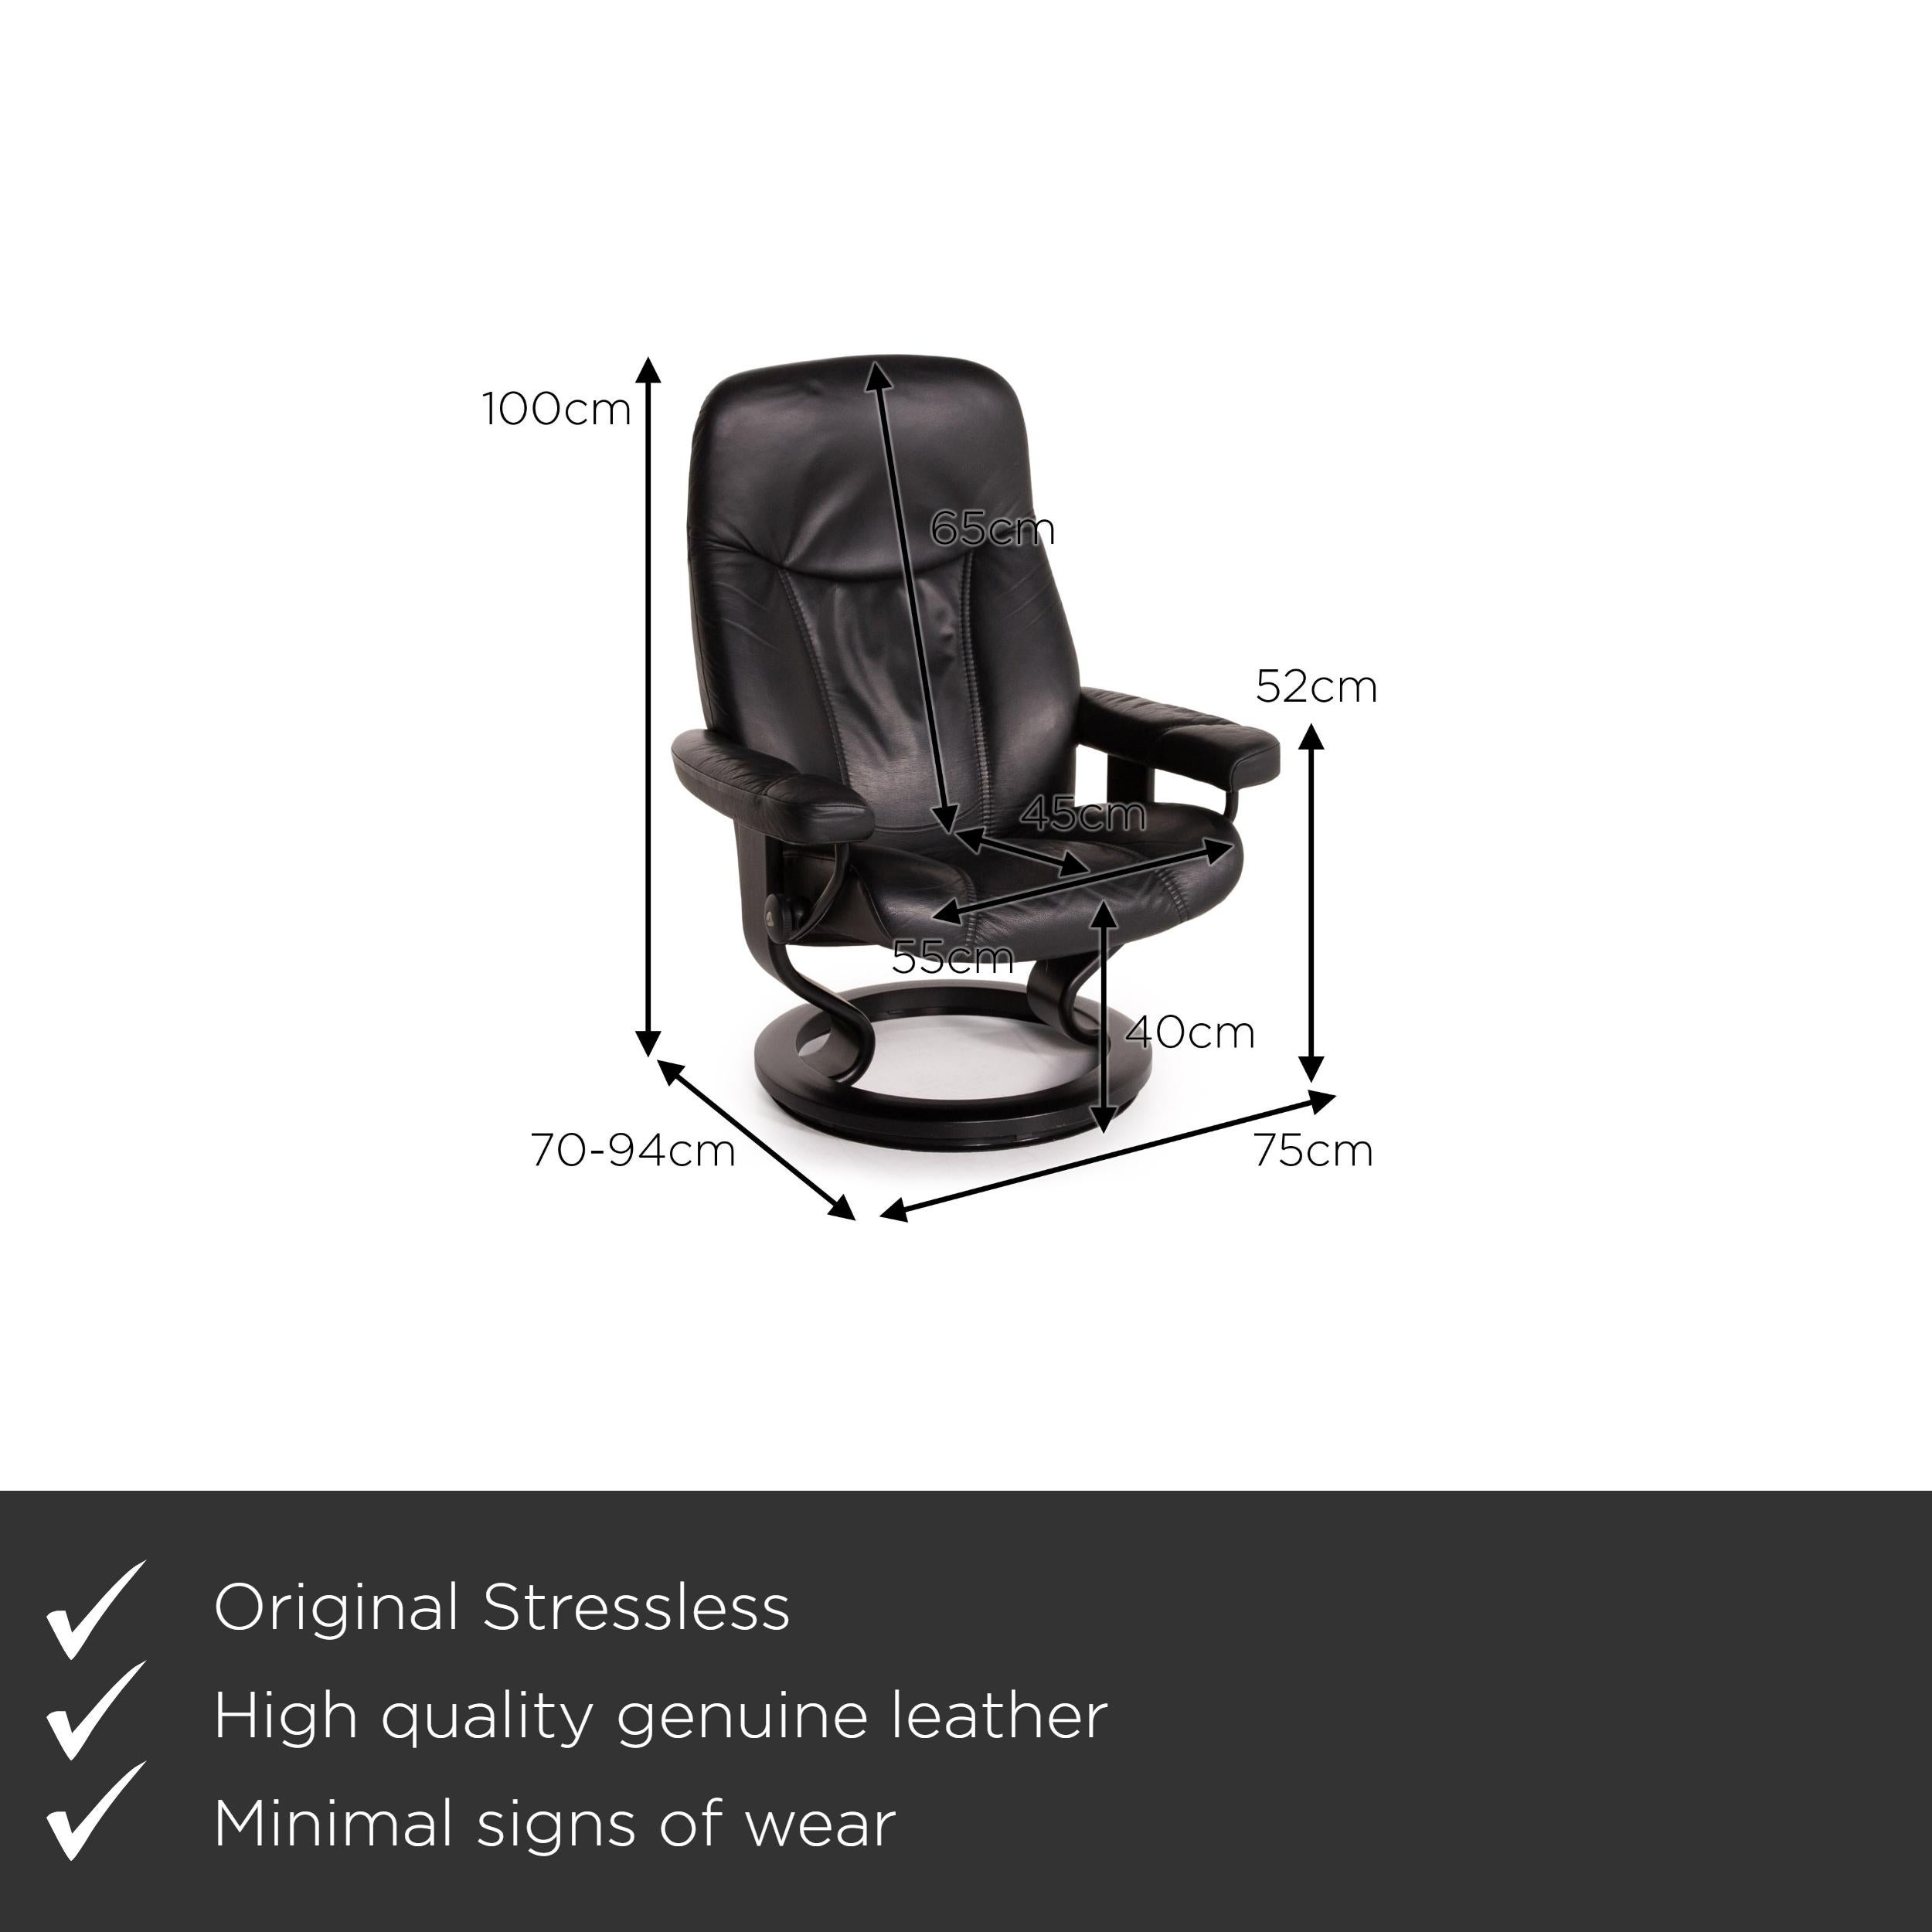 We present to you a Stressless Consul leather armchair incl. Stool black function relaxation.


 Product measurements in centimeters:
 

Depth: 70
Width: 75
Height: 100
Seat height: 40
Rest height: 52
Seat depth: 45
Seat width: 55
Back